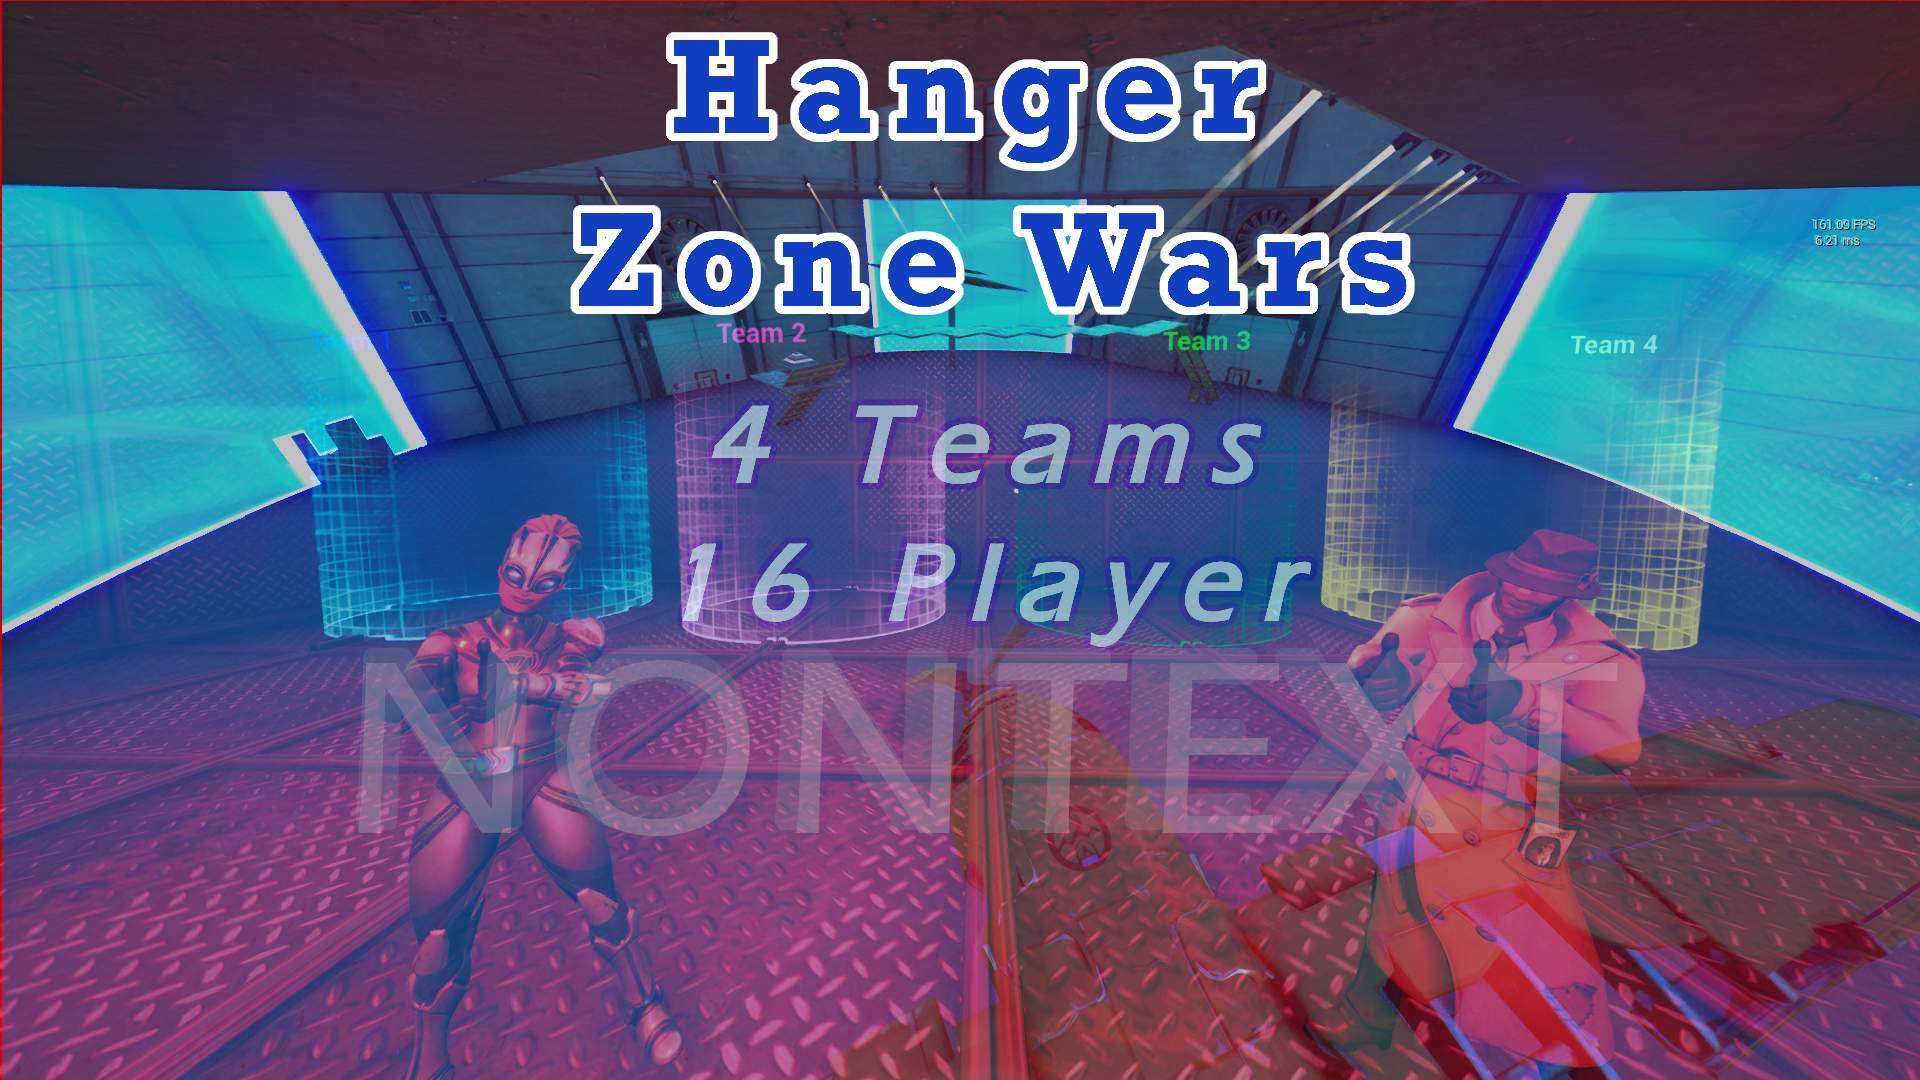 🚨 HANGER ZONE WARS BY NONTEXT 🚨